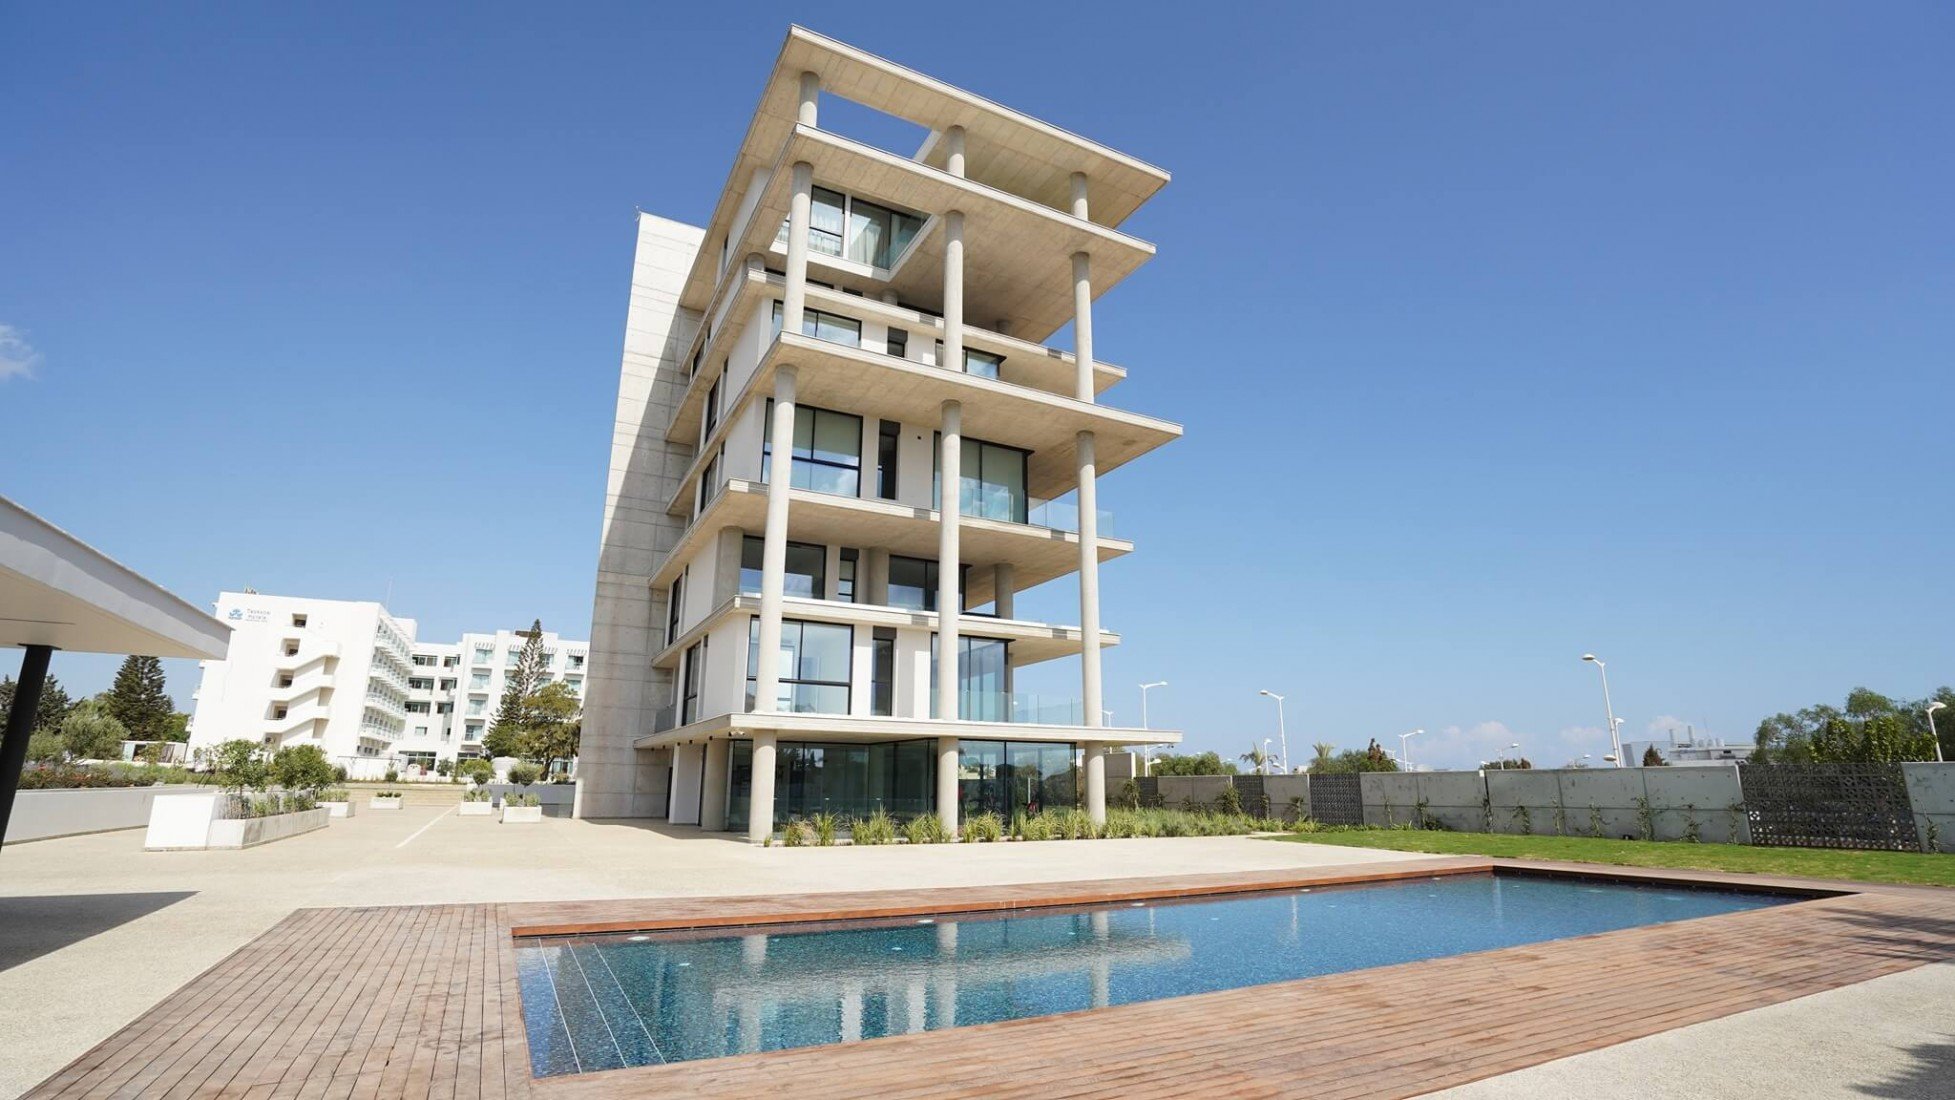 Apartment for sale in Famagusta, Cyprus 2808371858